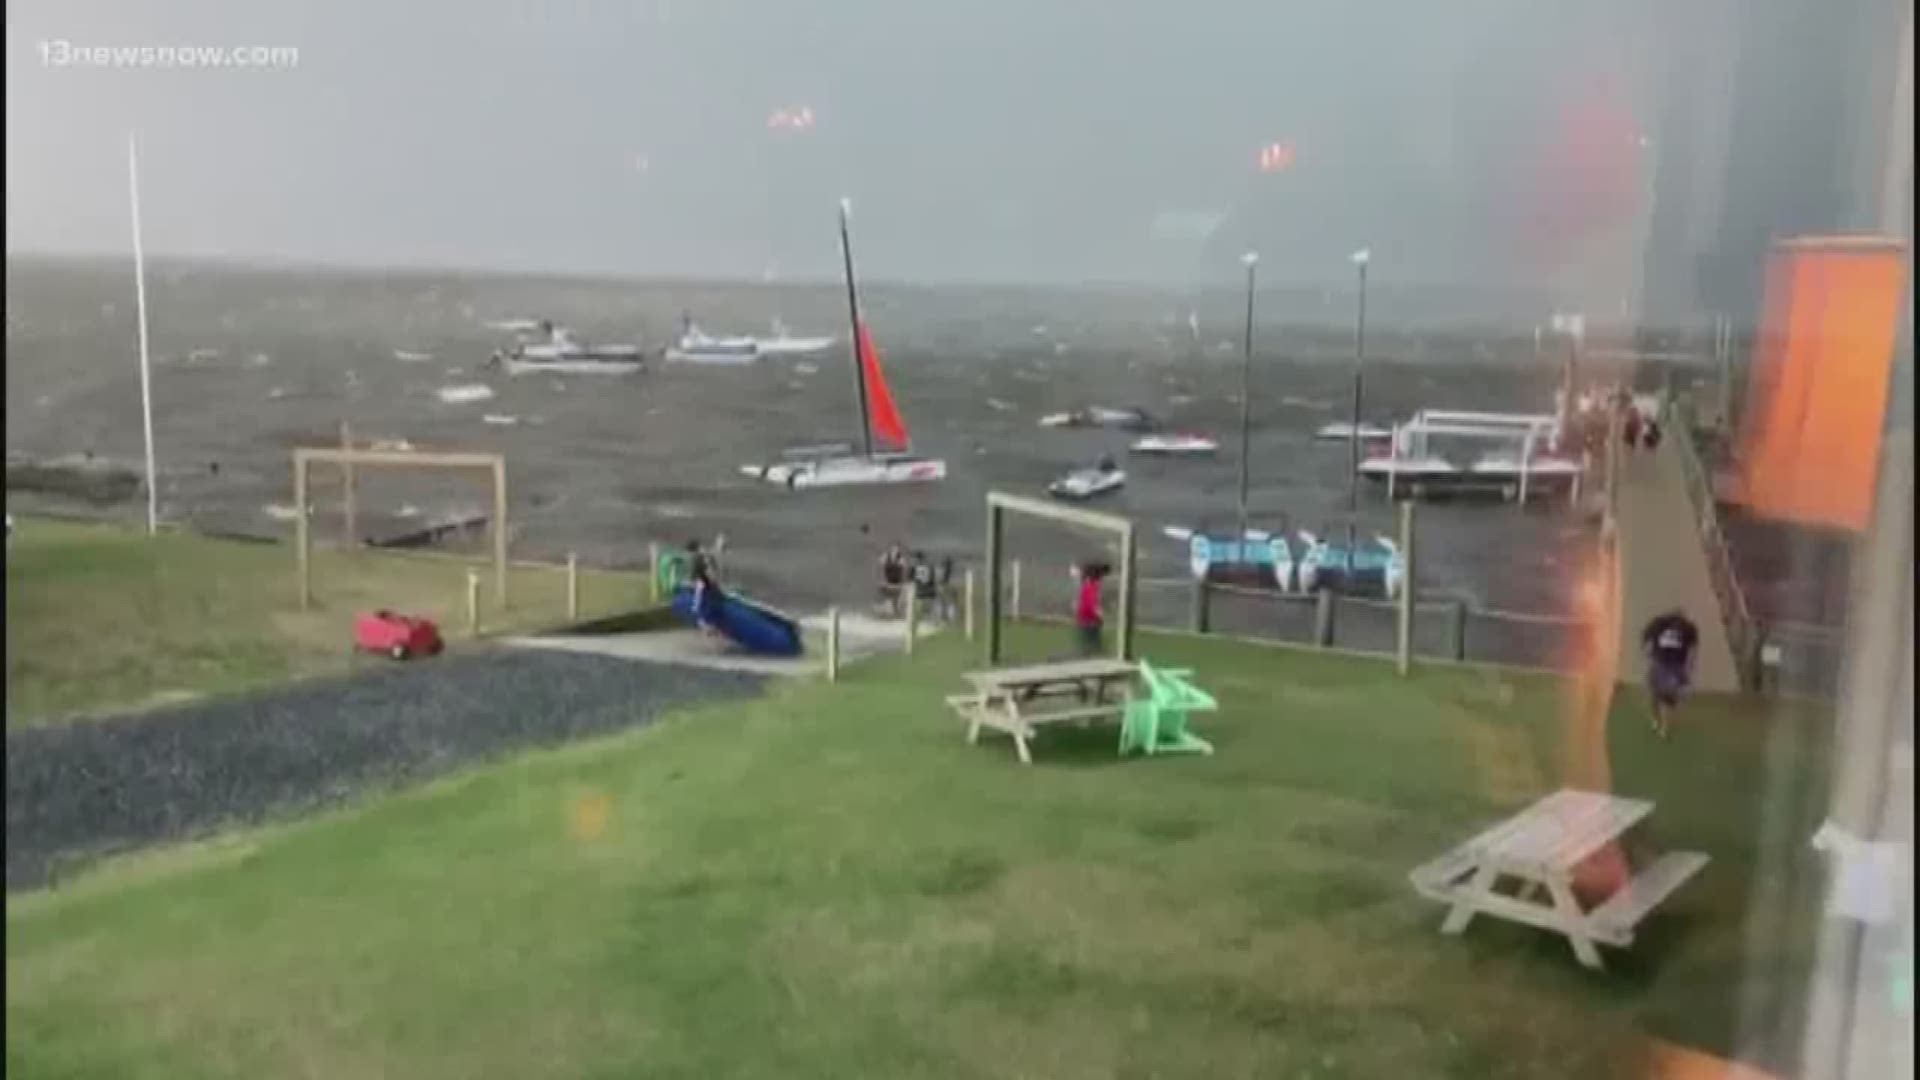 As people were enjoying a beach day, storms rolled in quickly on the Outerbanks and the winds caused tourists to run for cover.